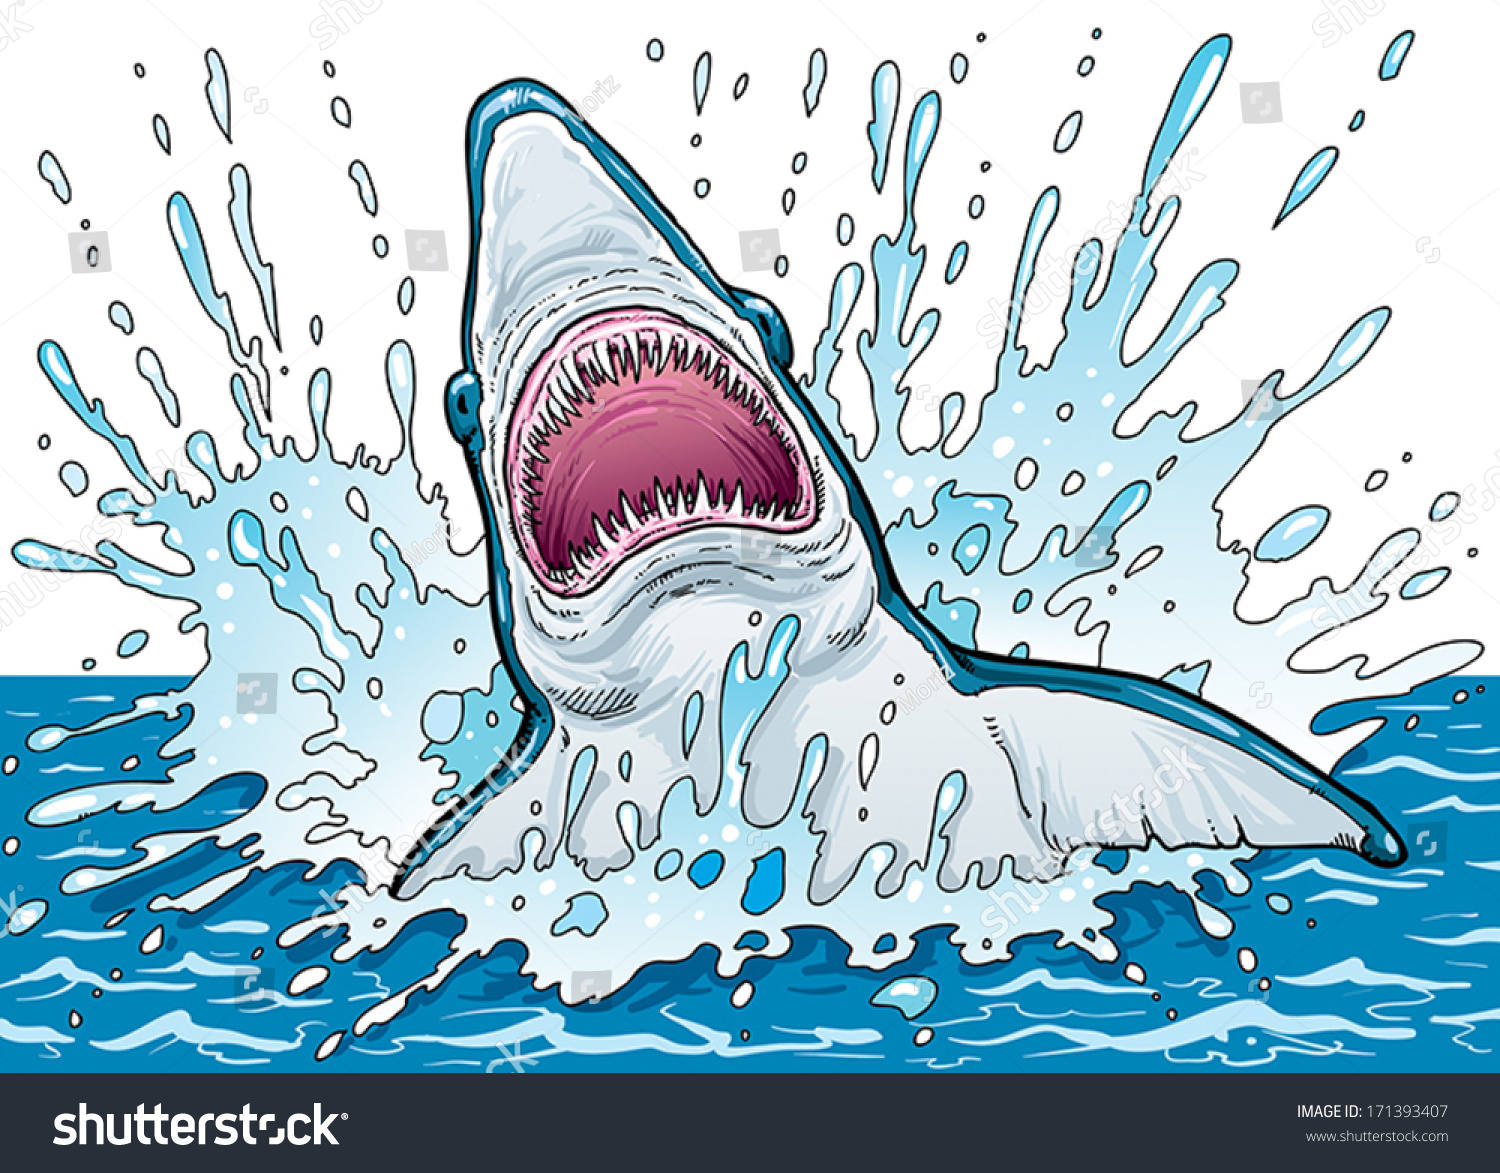 3,049 Sharks jumping out of water Images, Stock Photos & Vectors